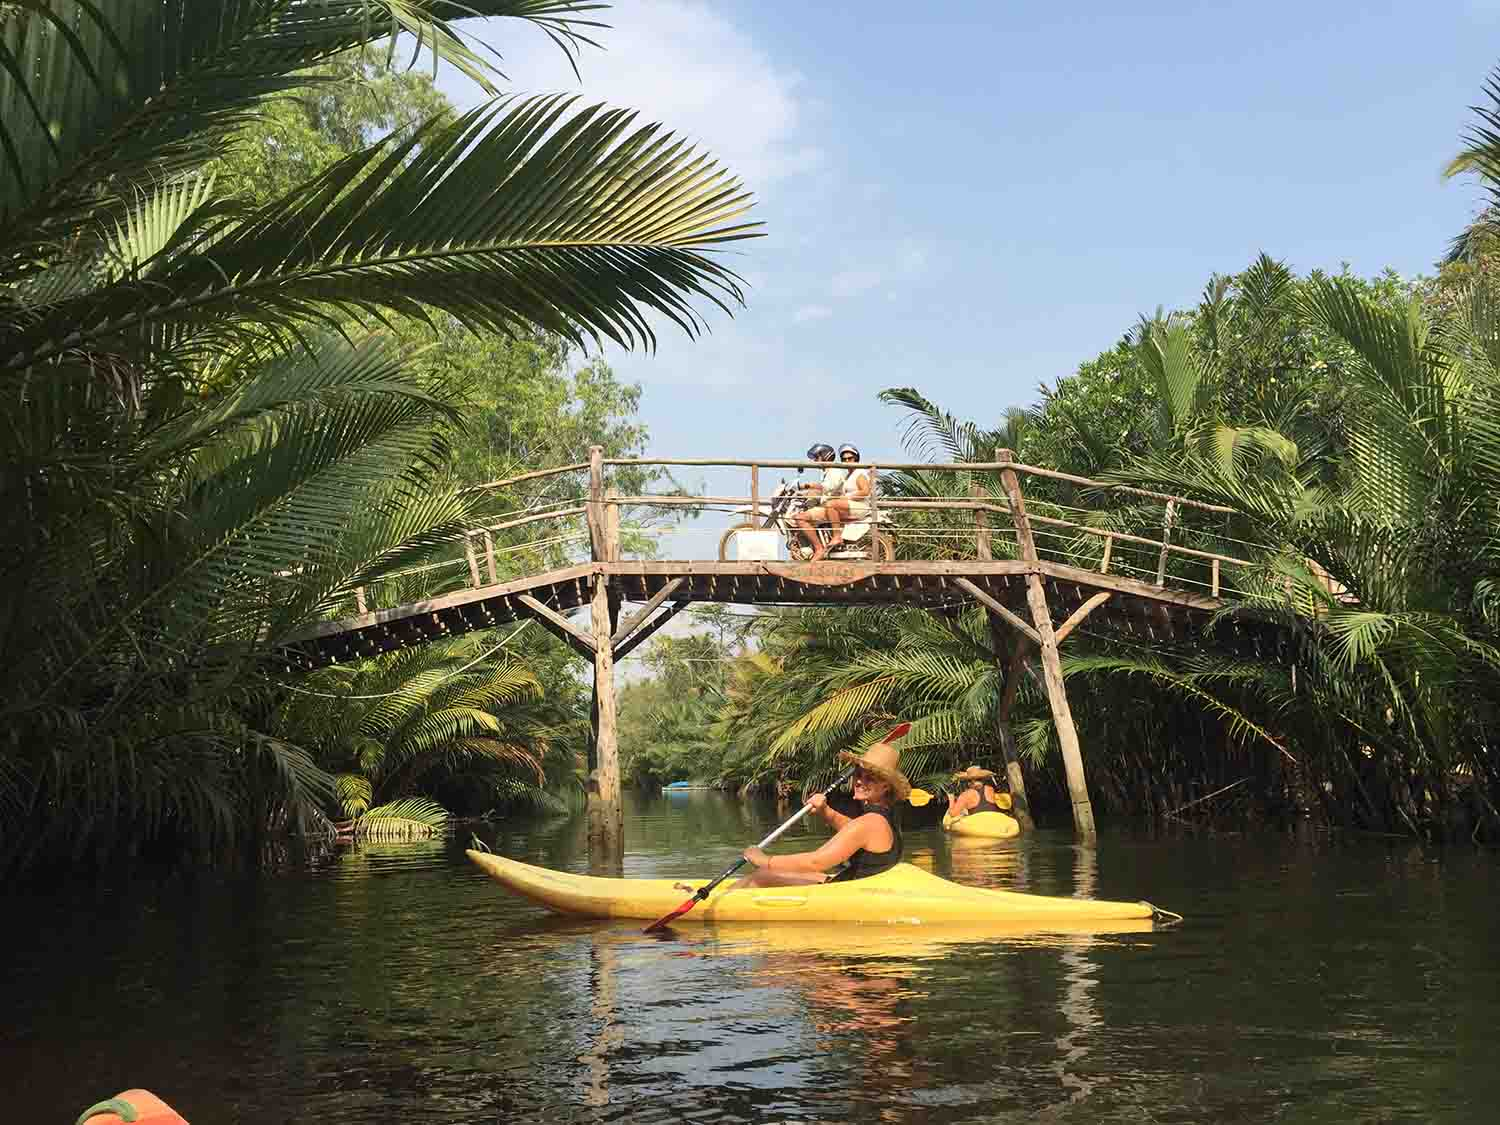 Kampot River is the perfect spot for various water activities, including kayaking